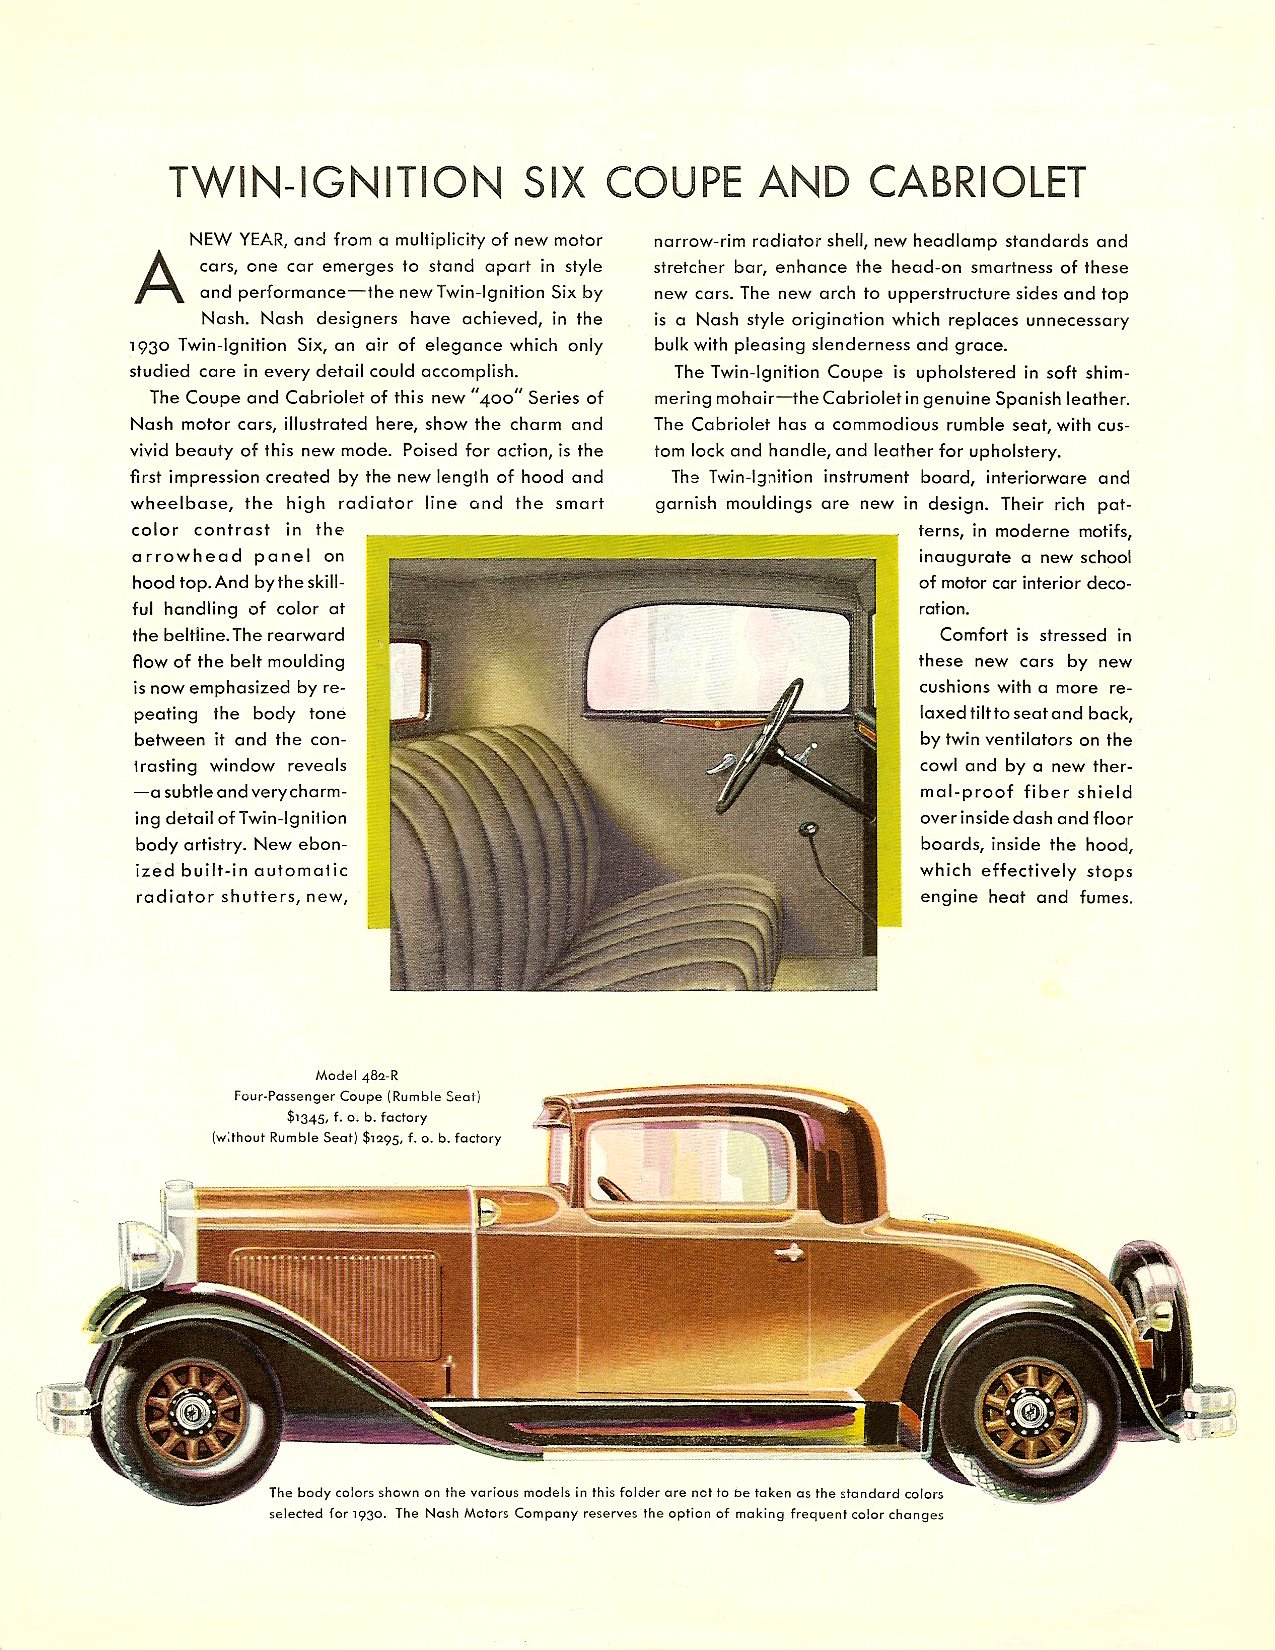 1930 Nash 400 Twin Ignition Six Coupes Folder Page 1